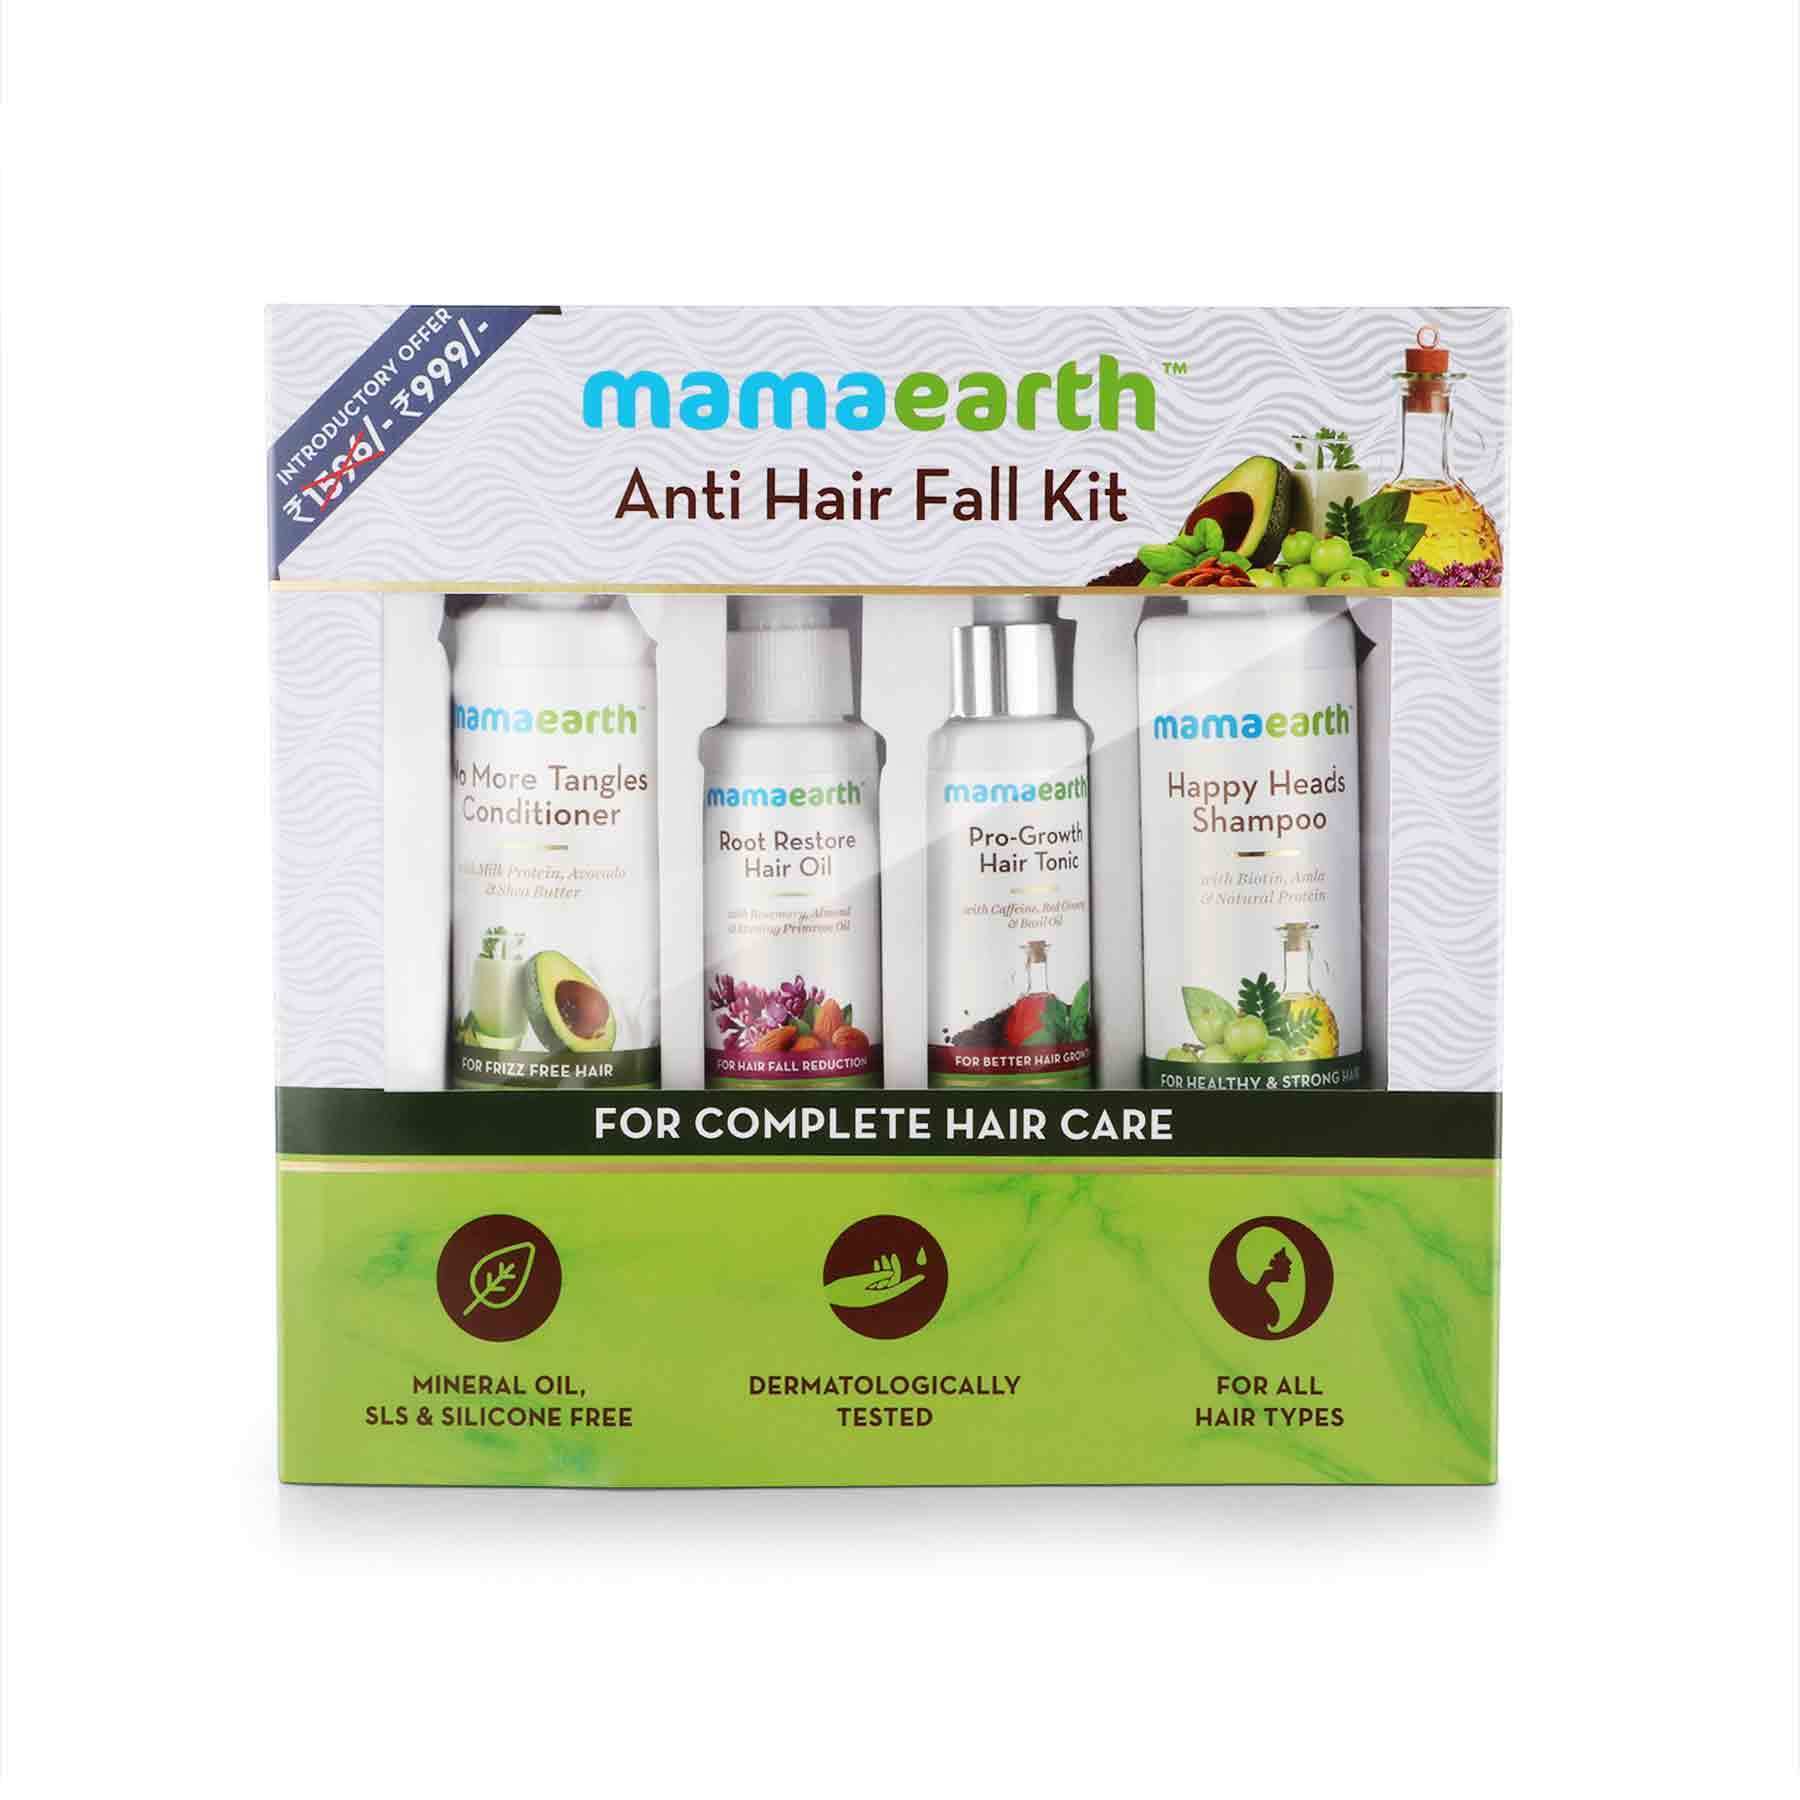 mamaearth hair products